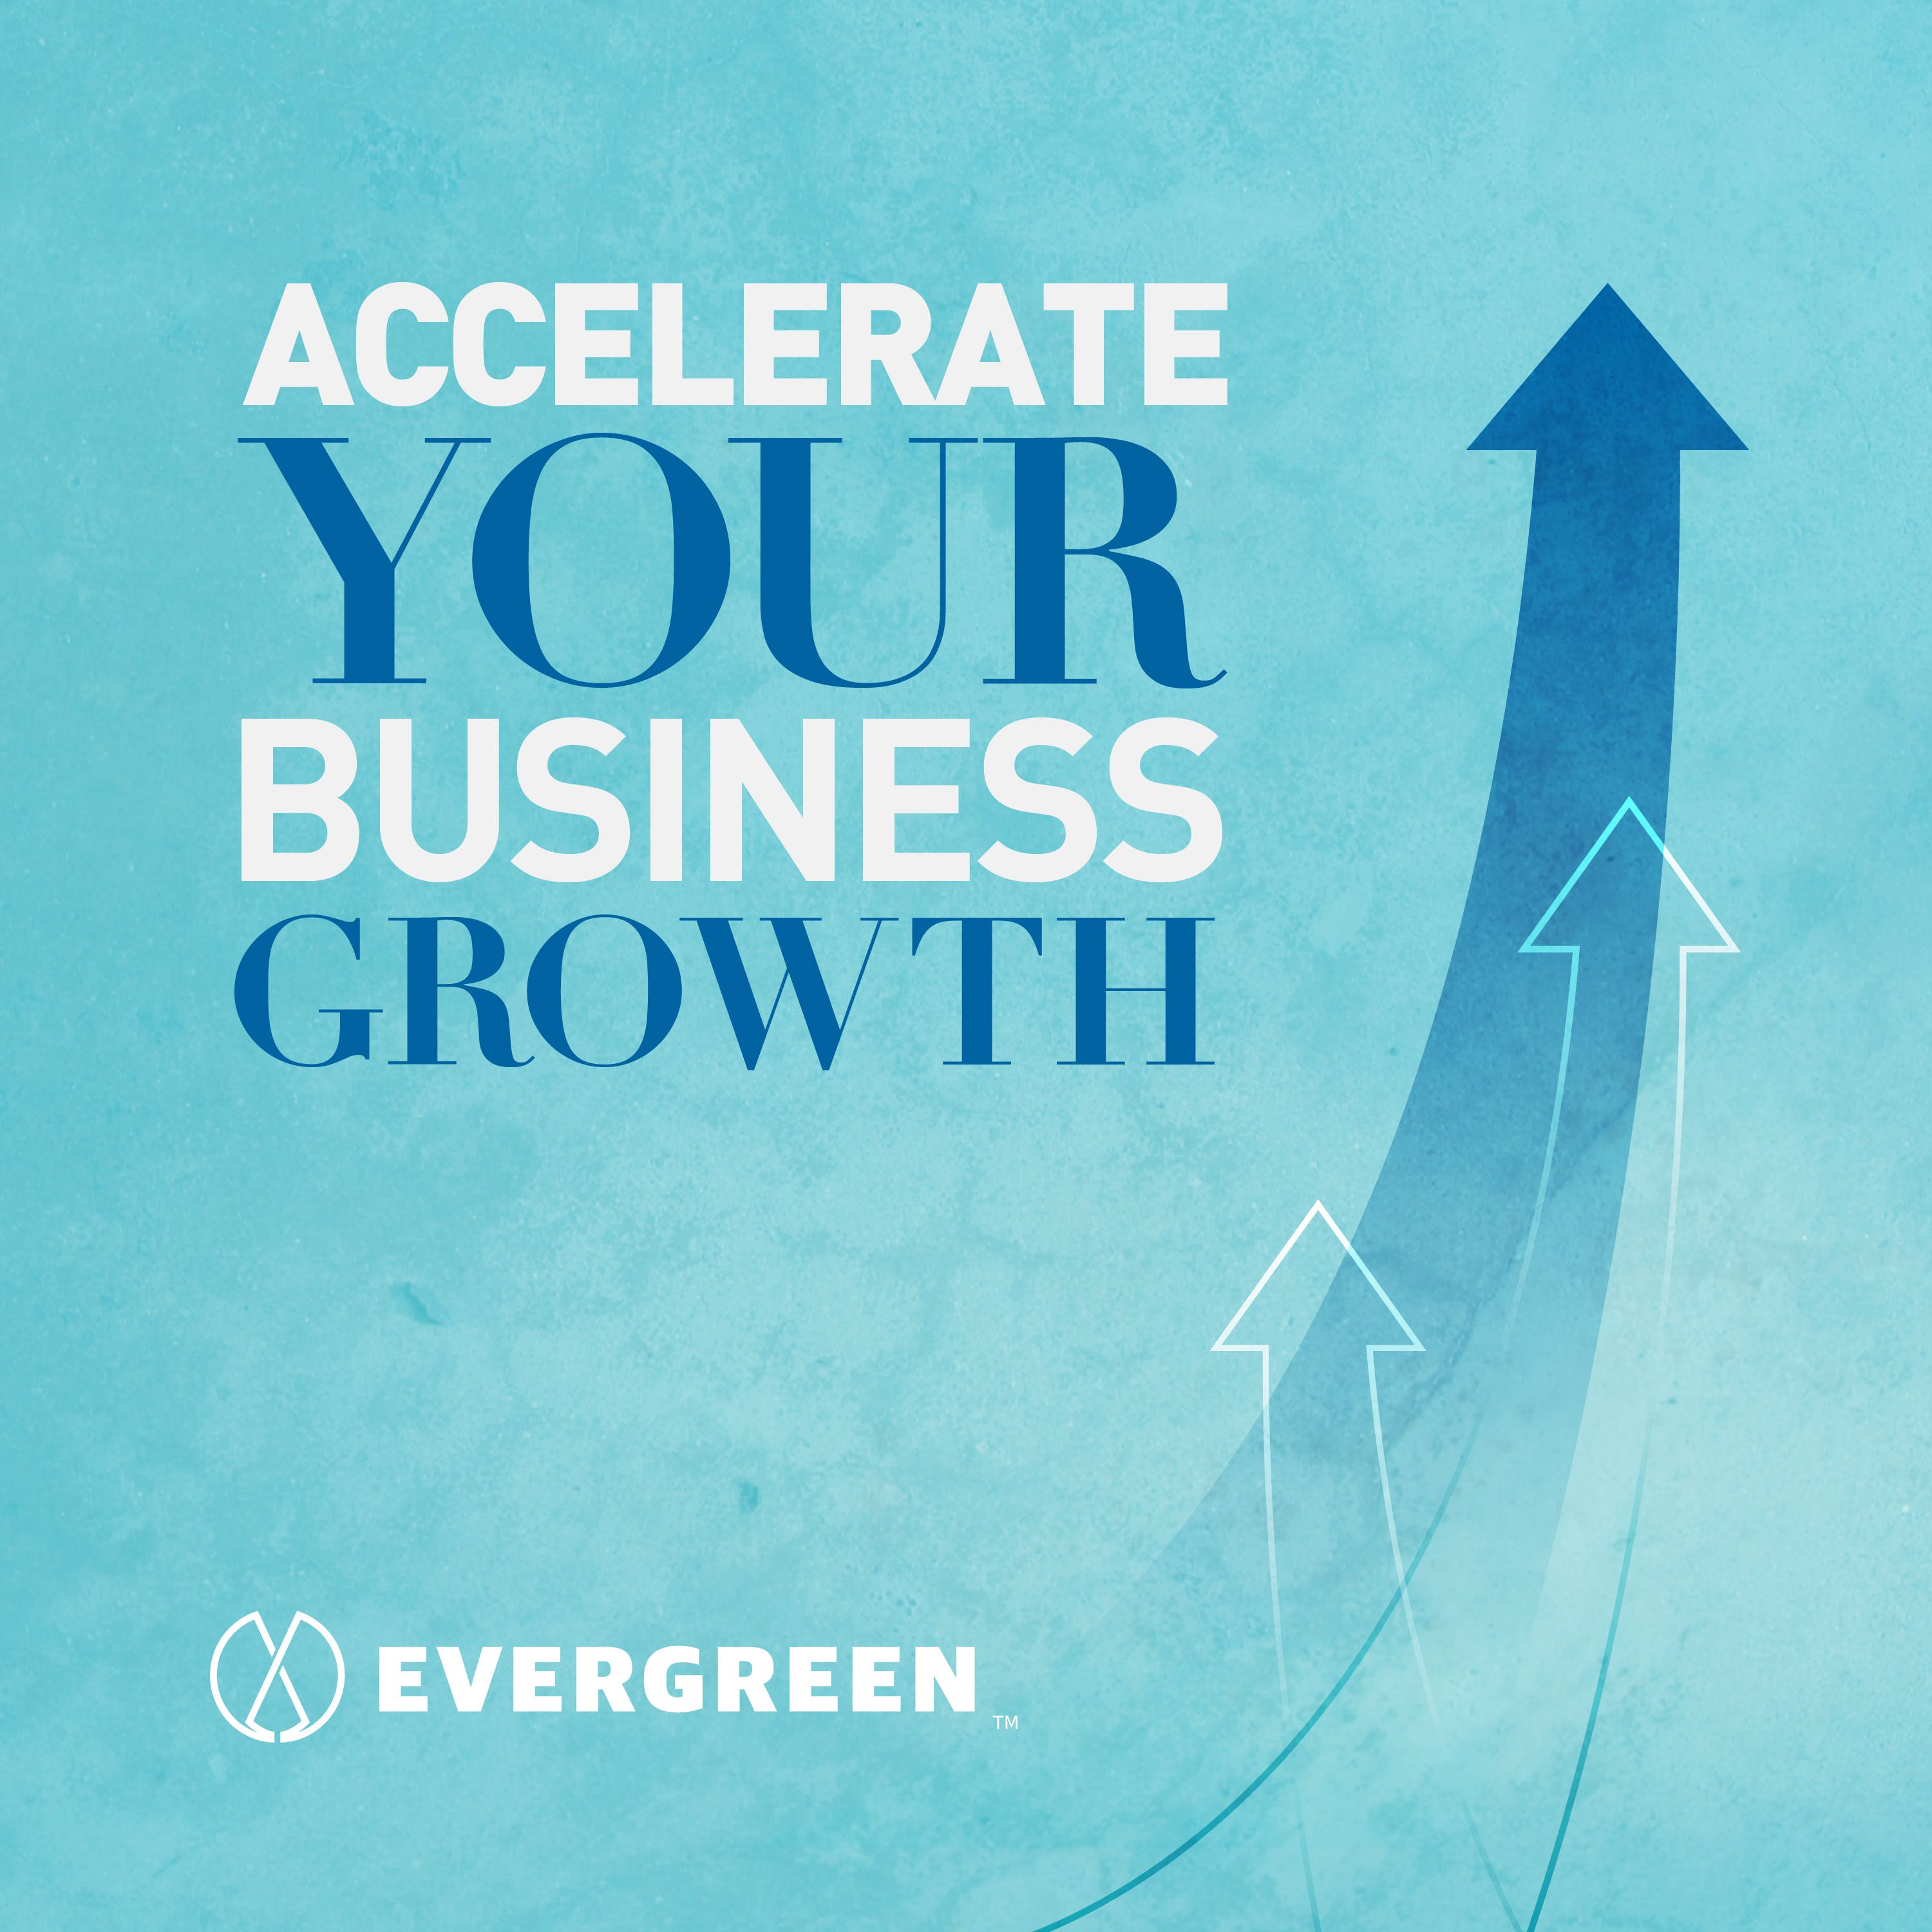 Accelerate Your Business Growth